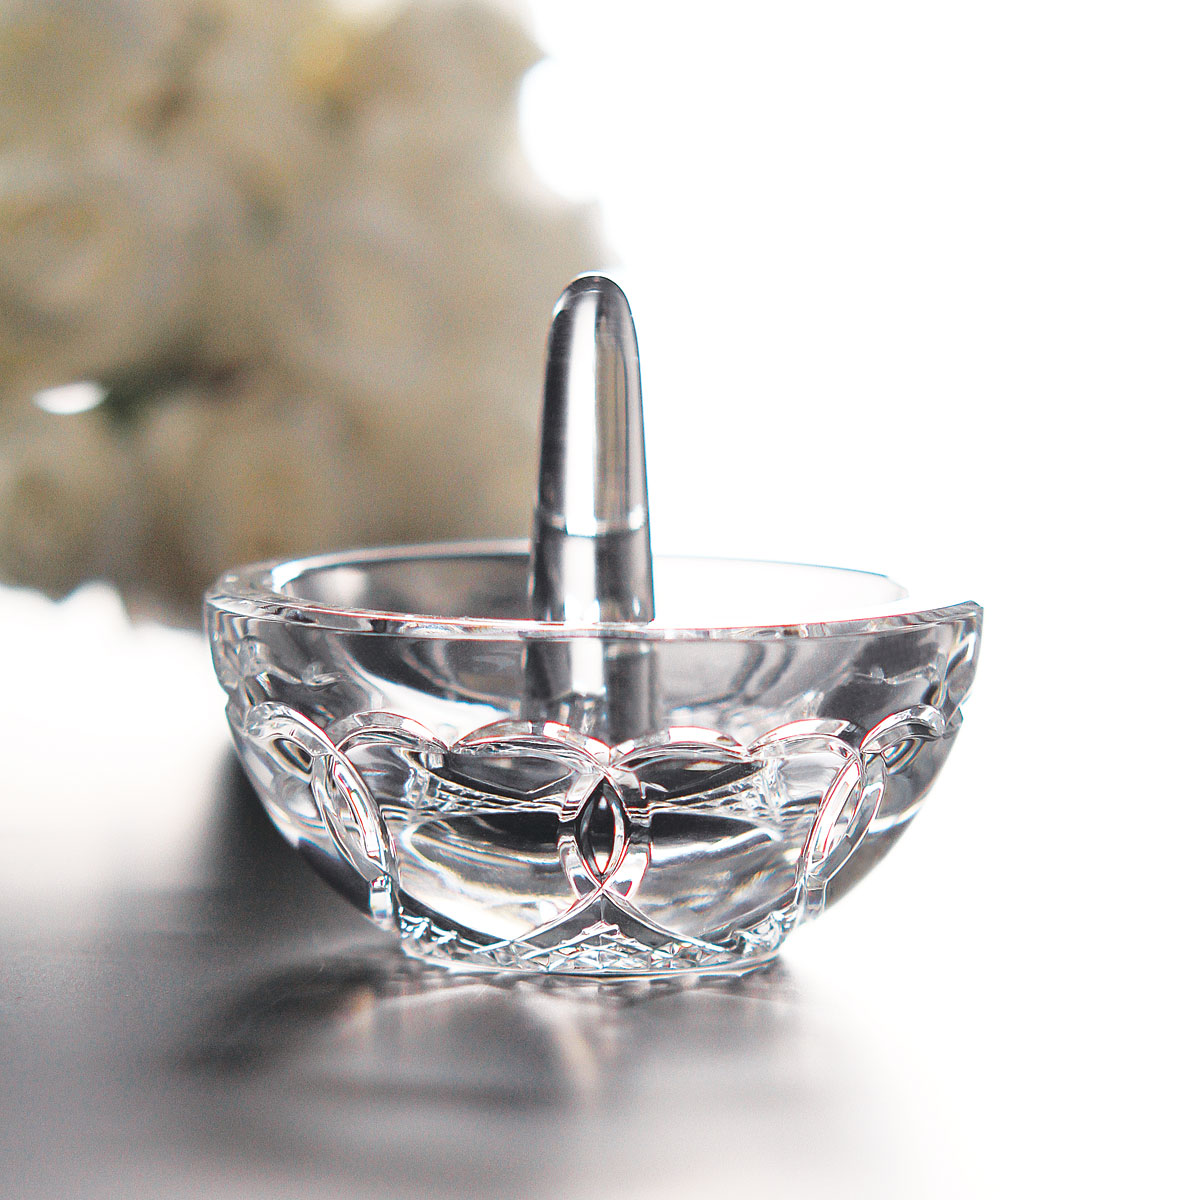 Waterford Crystal Wedding Ring Holder Crystal Classics